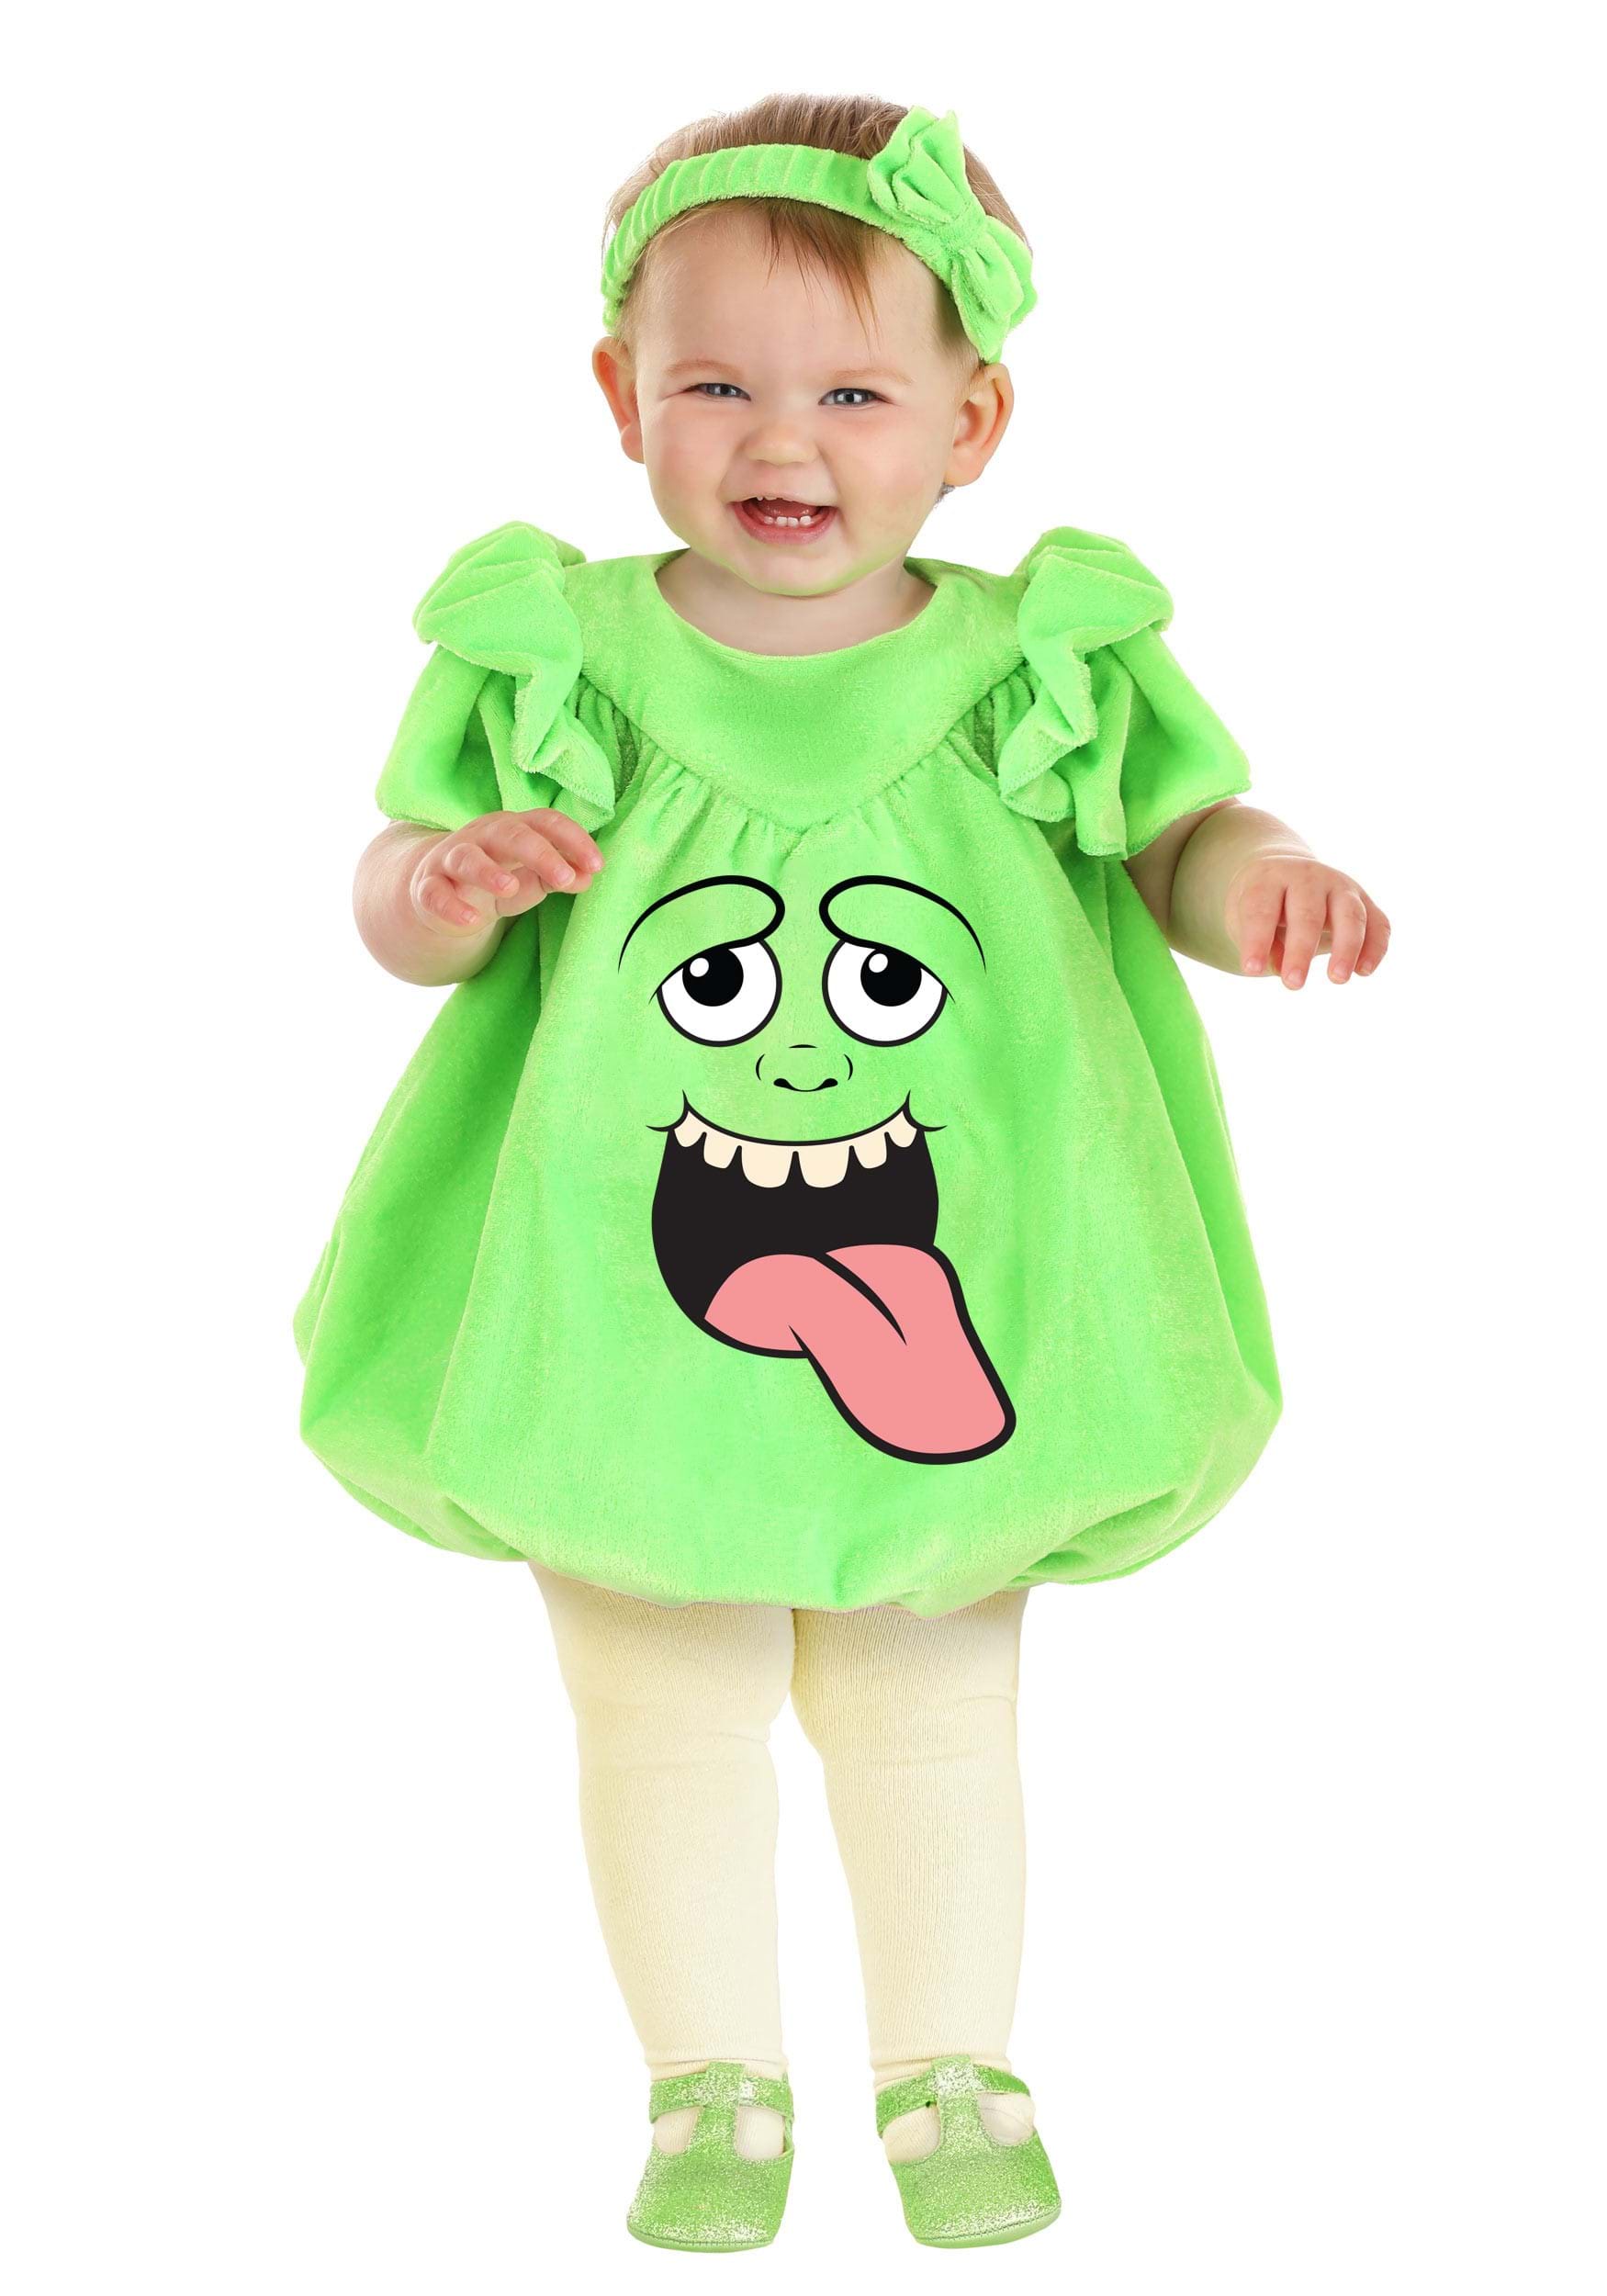 Photos - Fancy Dress Ghostbusters FUN Costumes  Slimer Bubble Infant's Costume Green/Black&# 